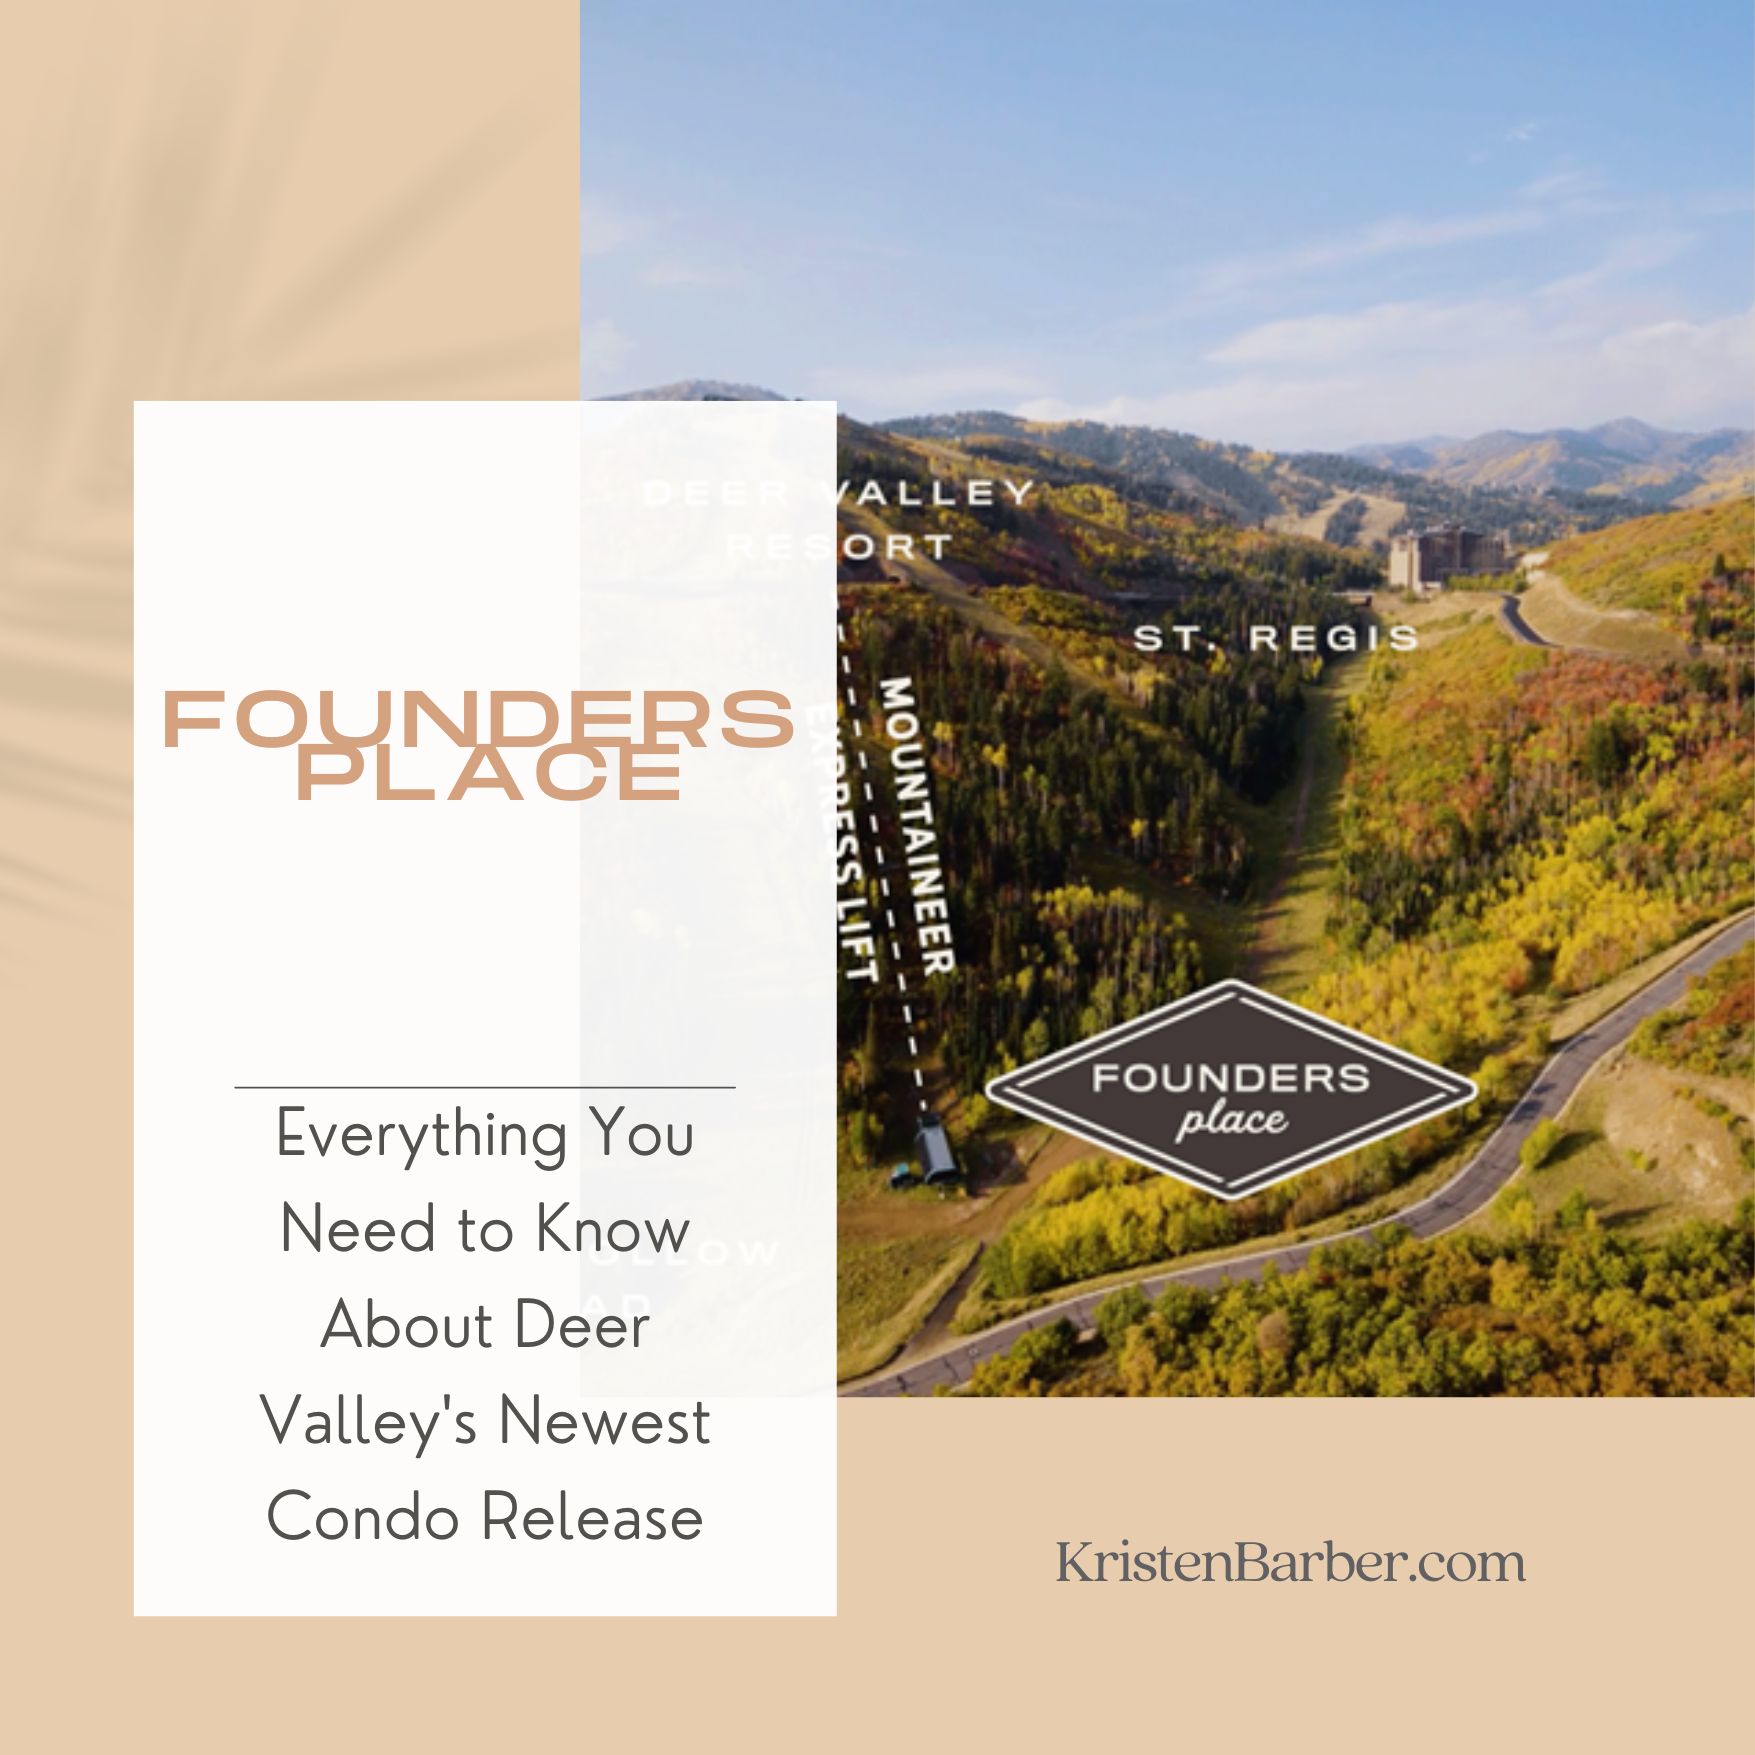 Founders Place - Everything You Need to Know About Deer Valley's Newest Condo Release